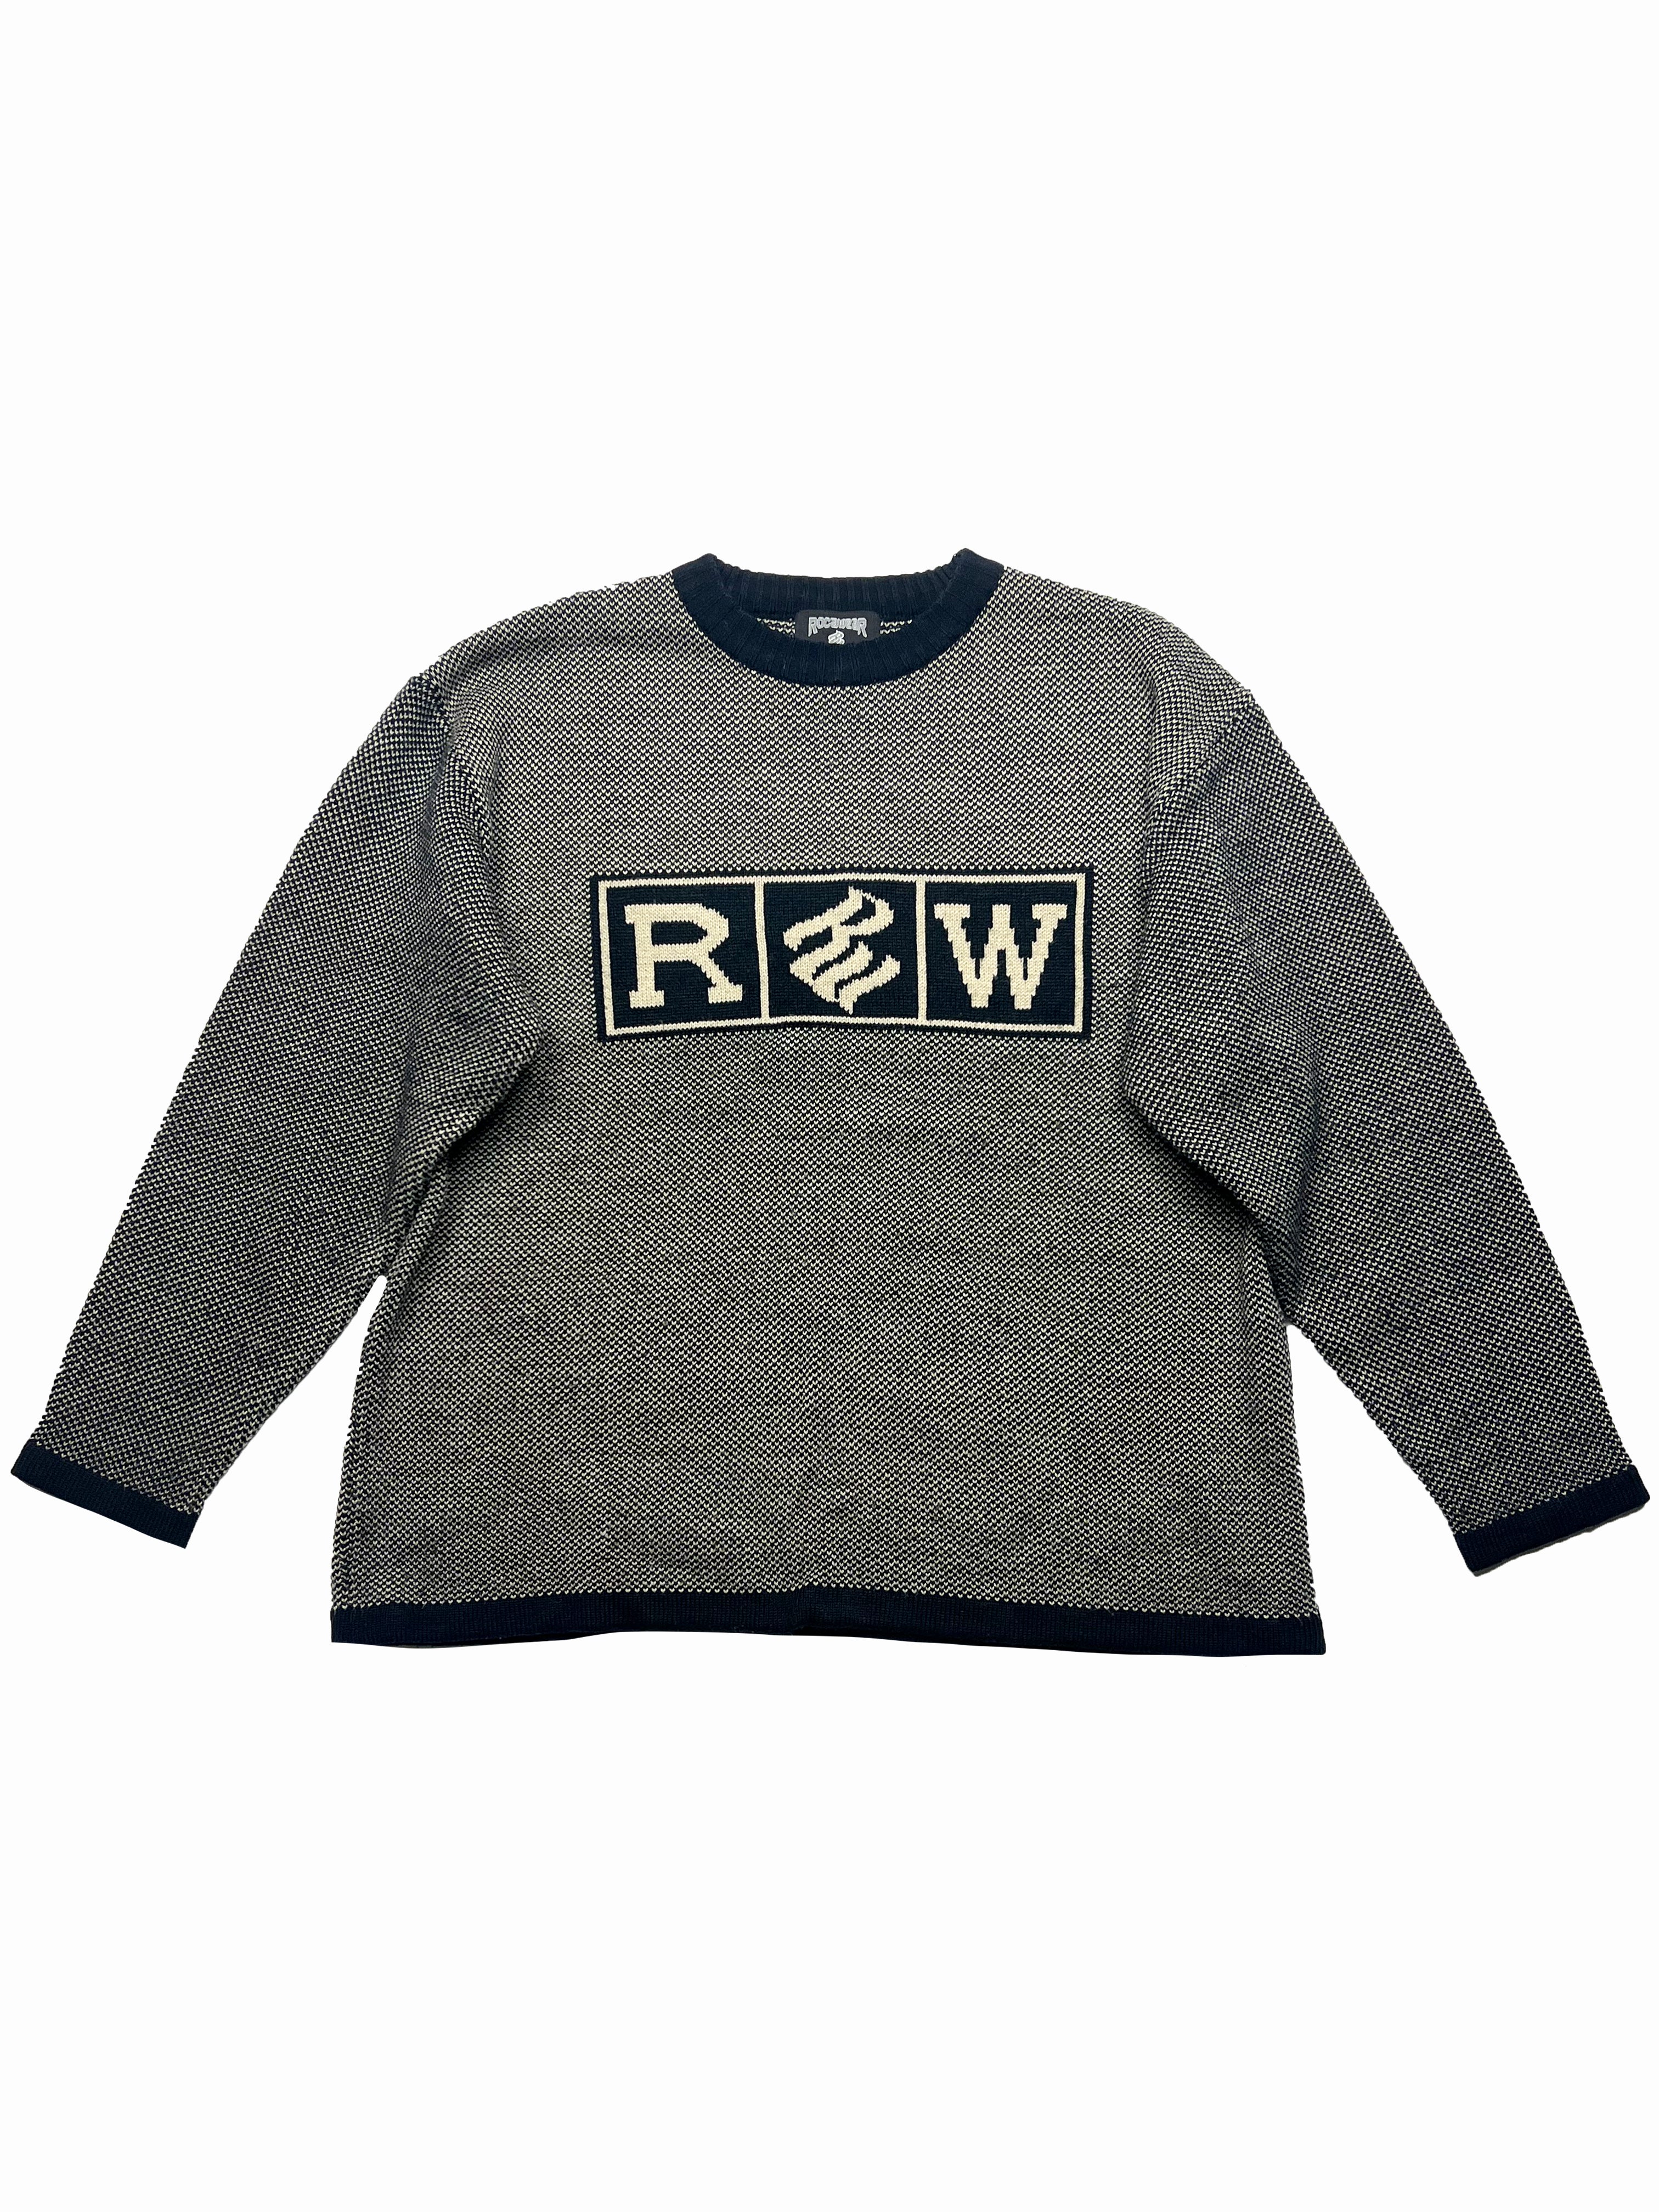 Rocawear Grey Spell Out Knit Jumper 90's